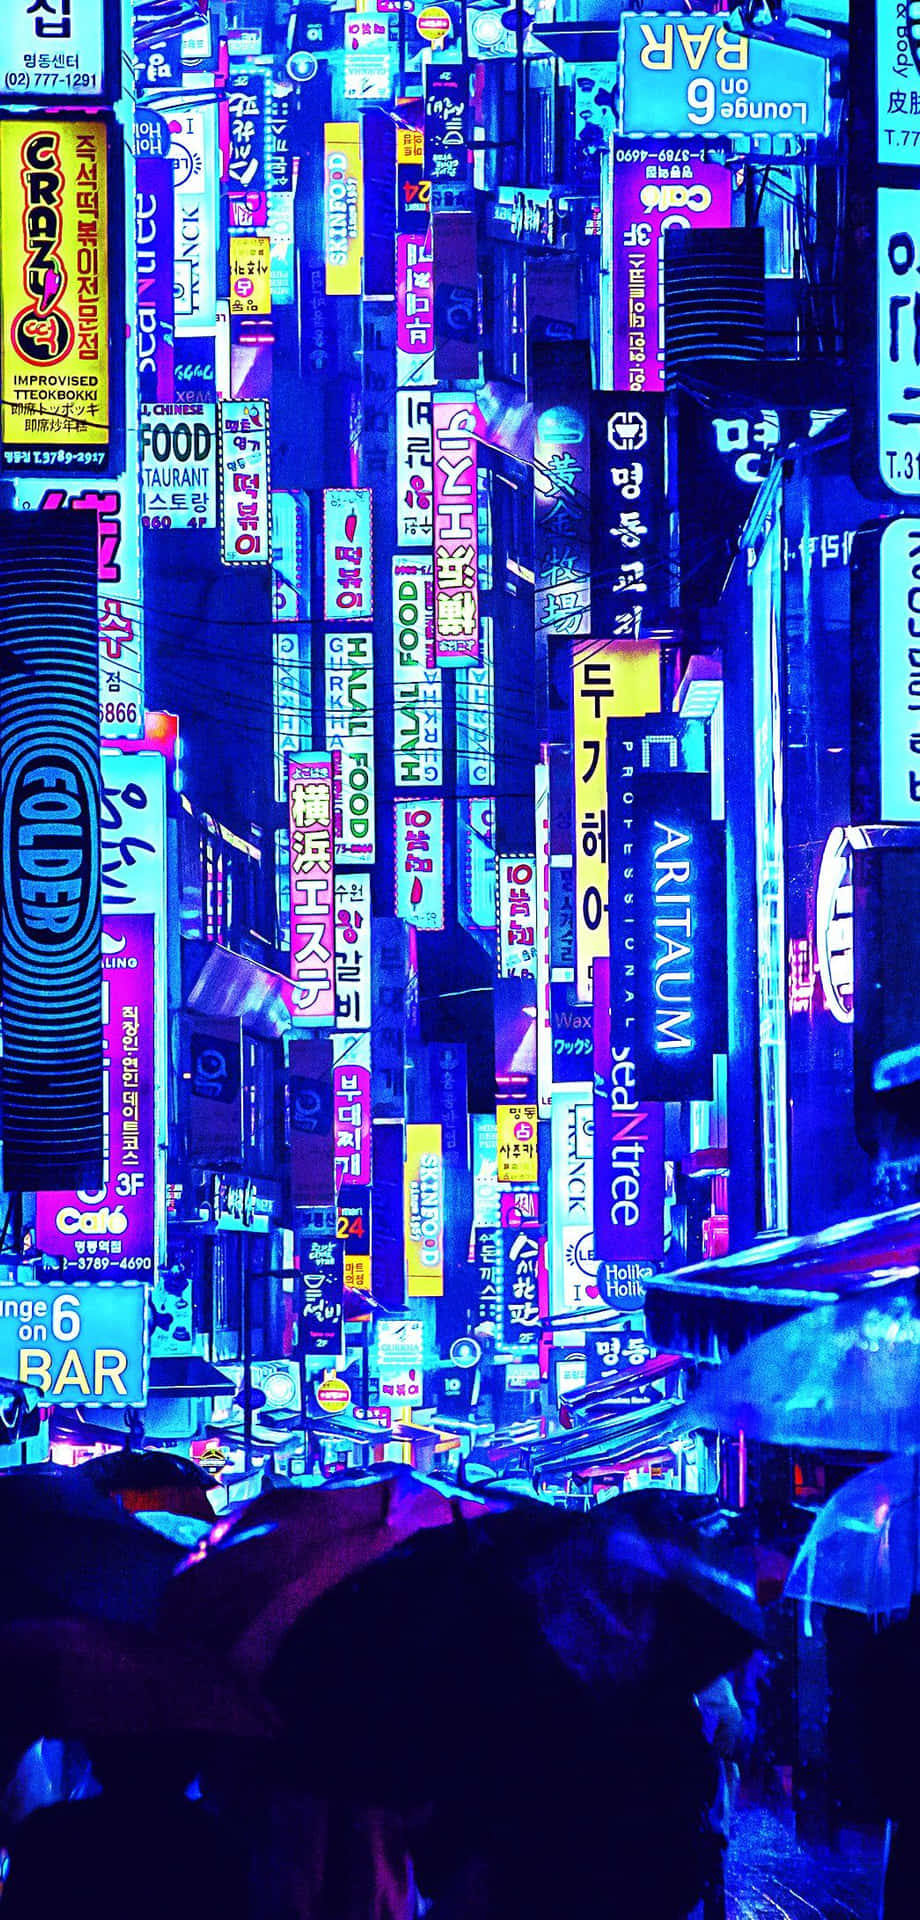 A City With Many Neon Signs